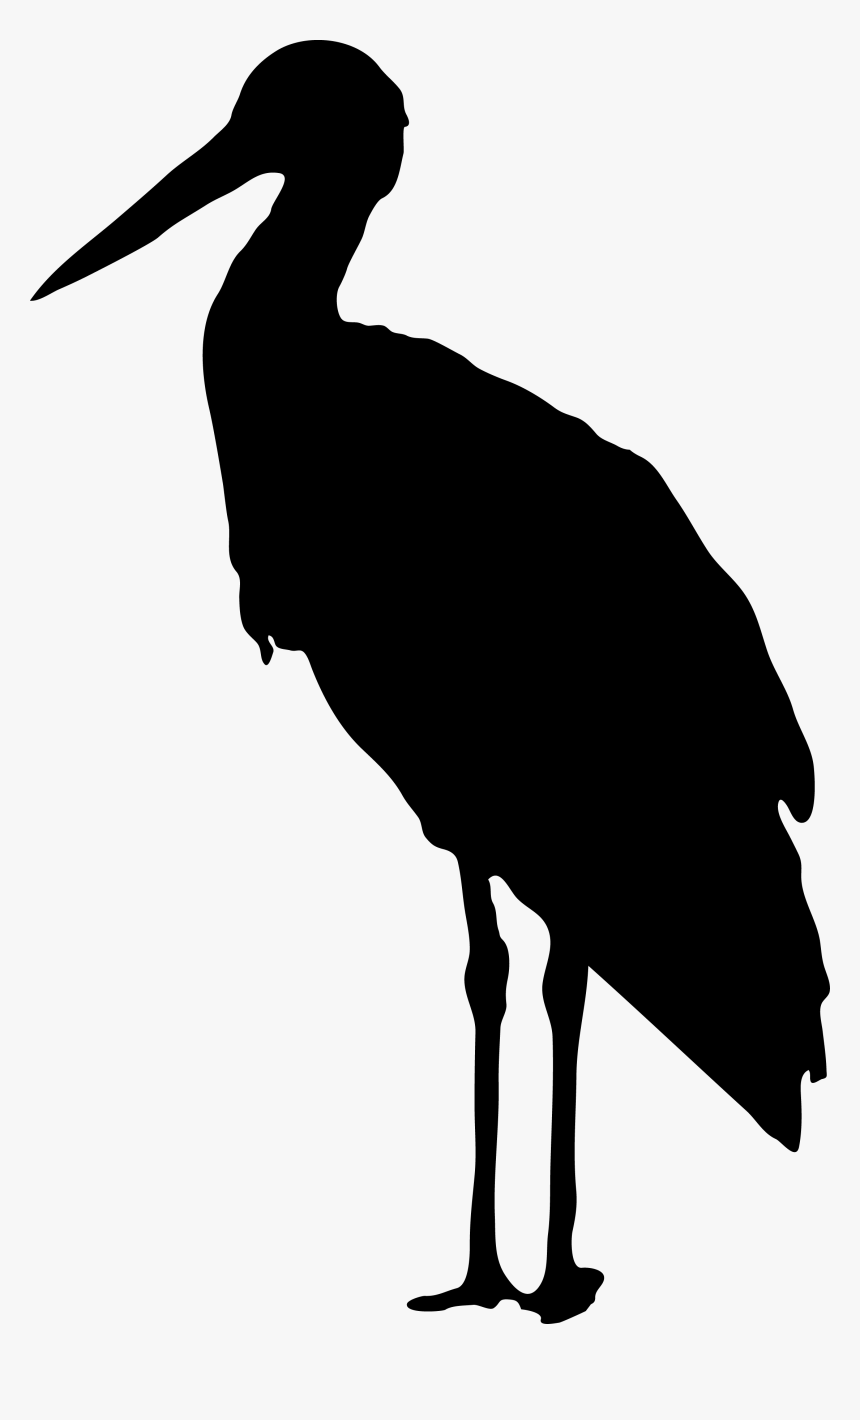 Black Silhouette Of A Stork - Stork Silhouette Png, Transparent Png, Free Download